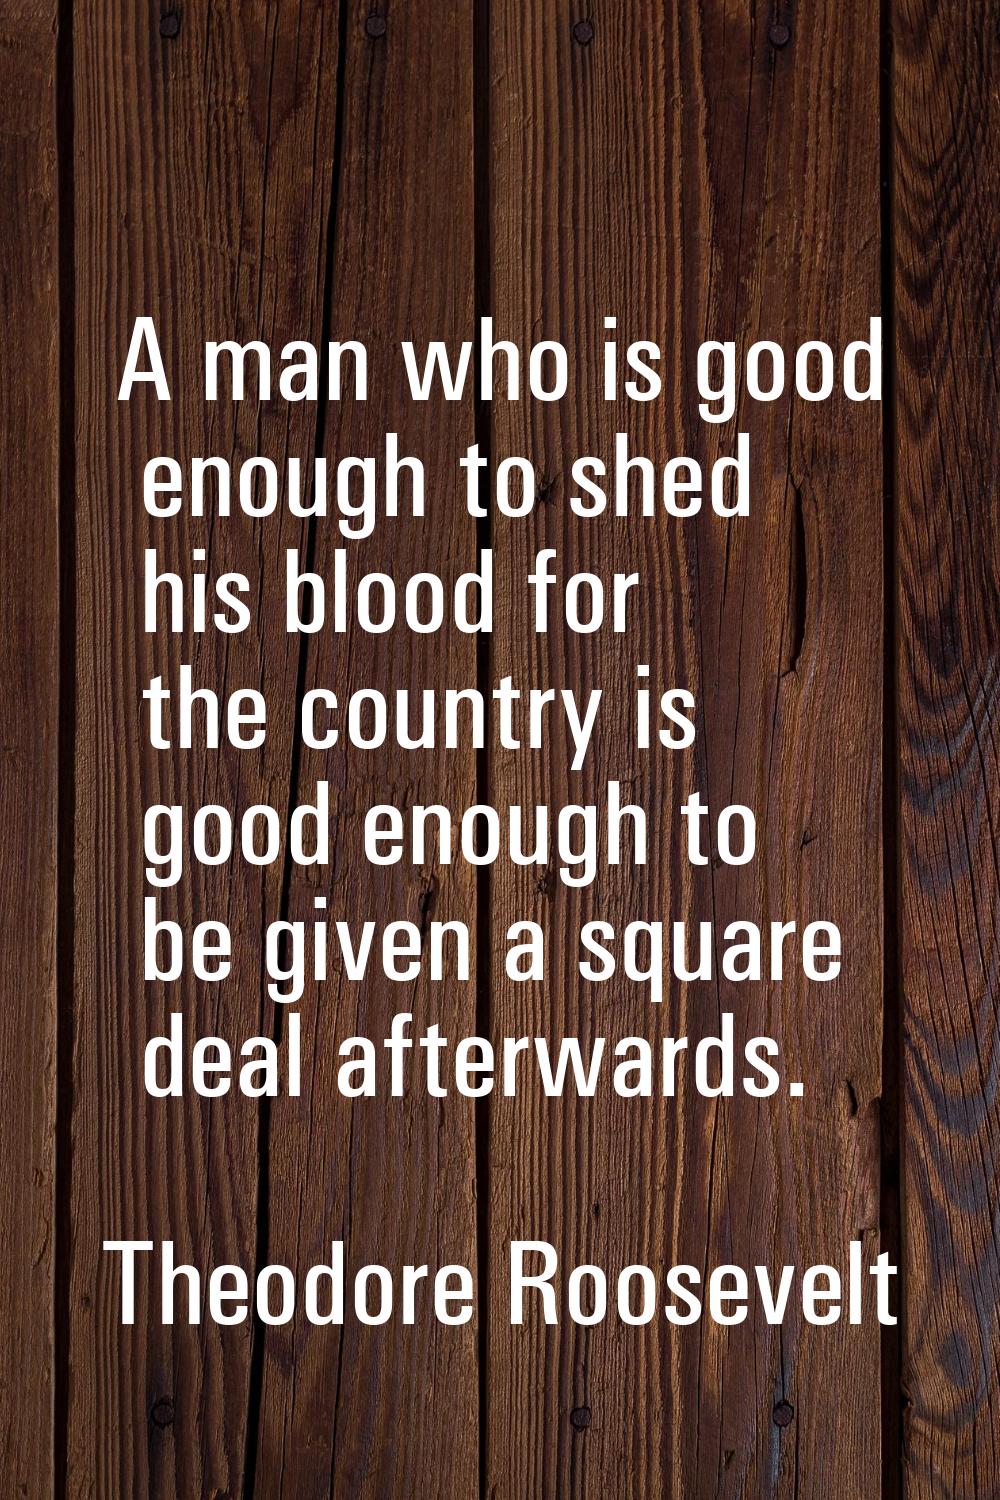 A man who is good enough to shed his blood for the country is good enough to be given a square deal